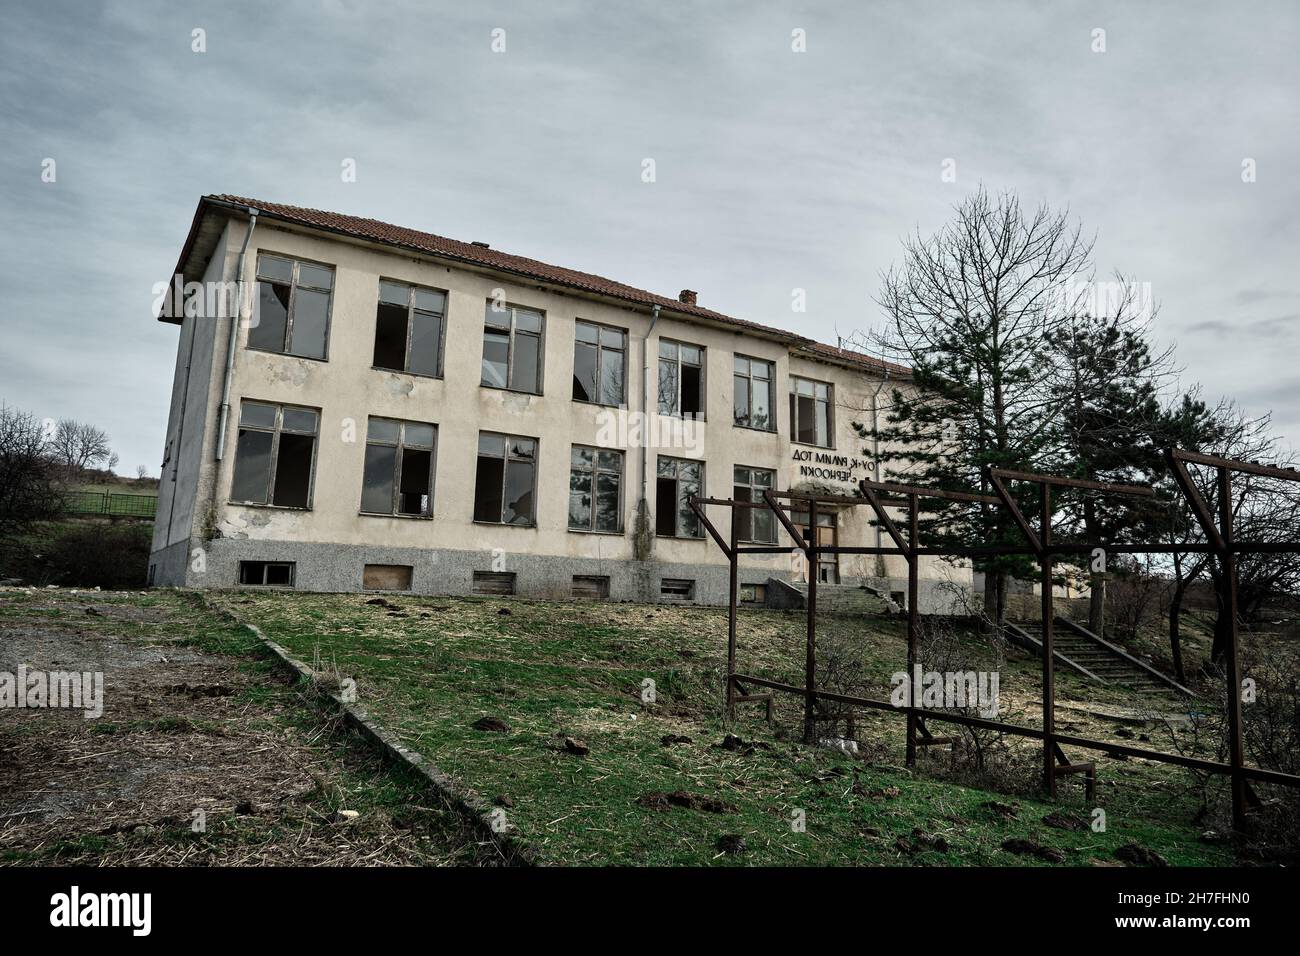 Bulgaria, Kardzali. Old brownfield and abandoned soviet type school with overcast and very cloudy sky. Stock Photo